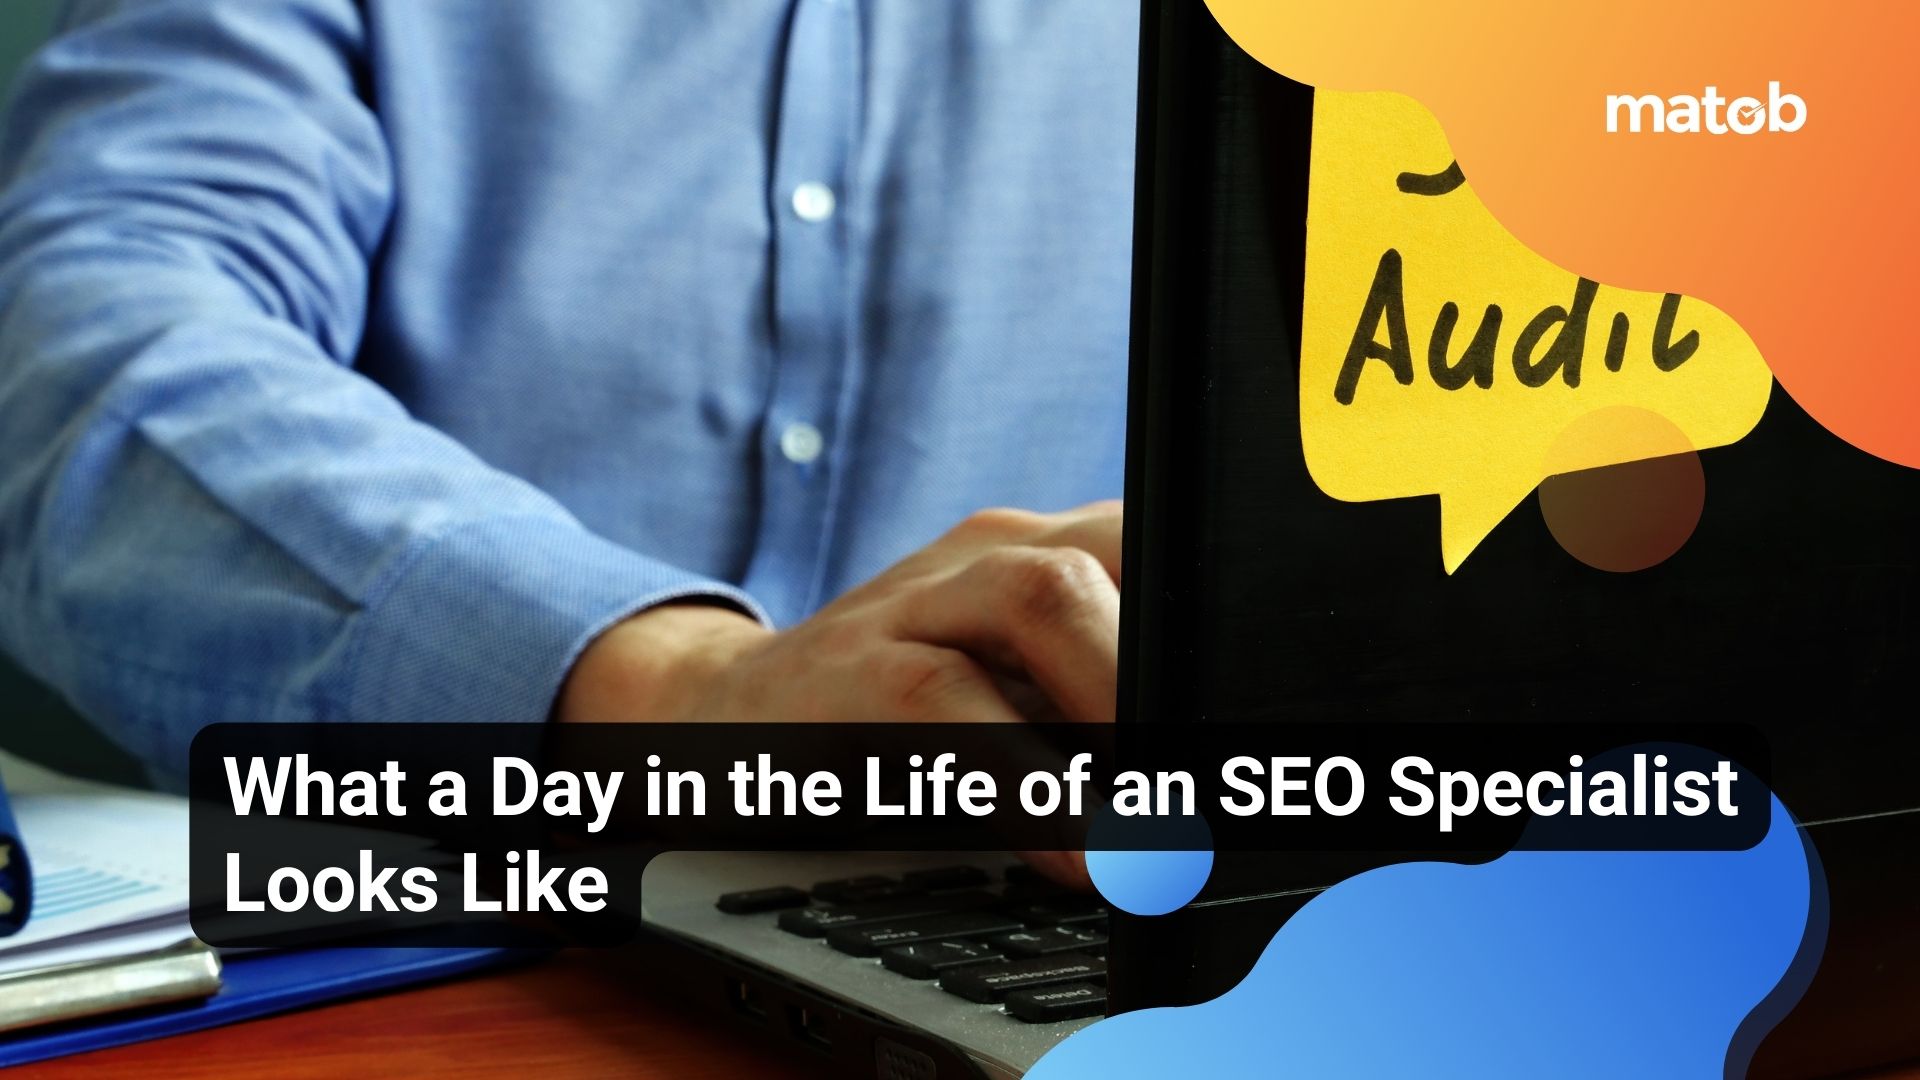 What a Day in the Life of an SEO Specialist Looks Like